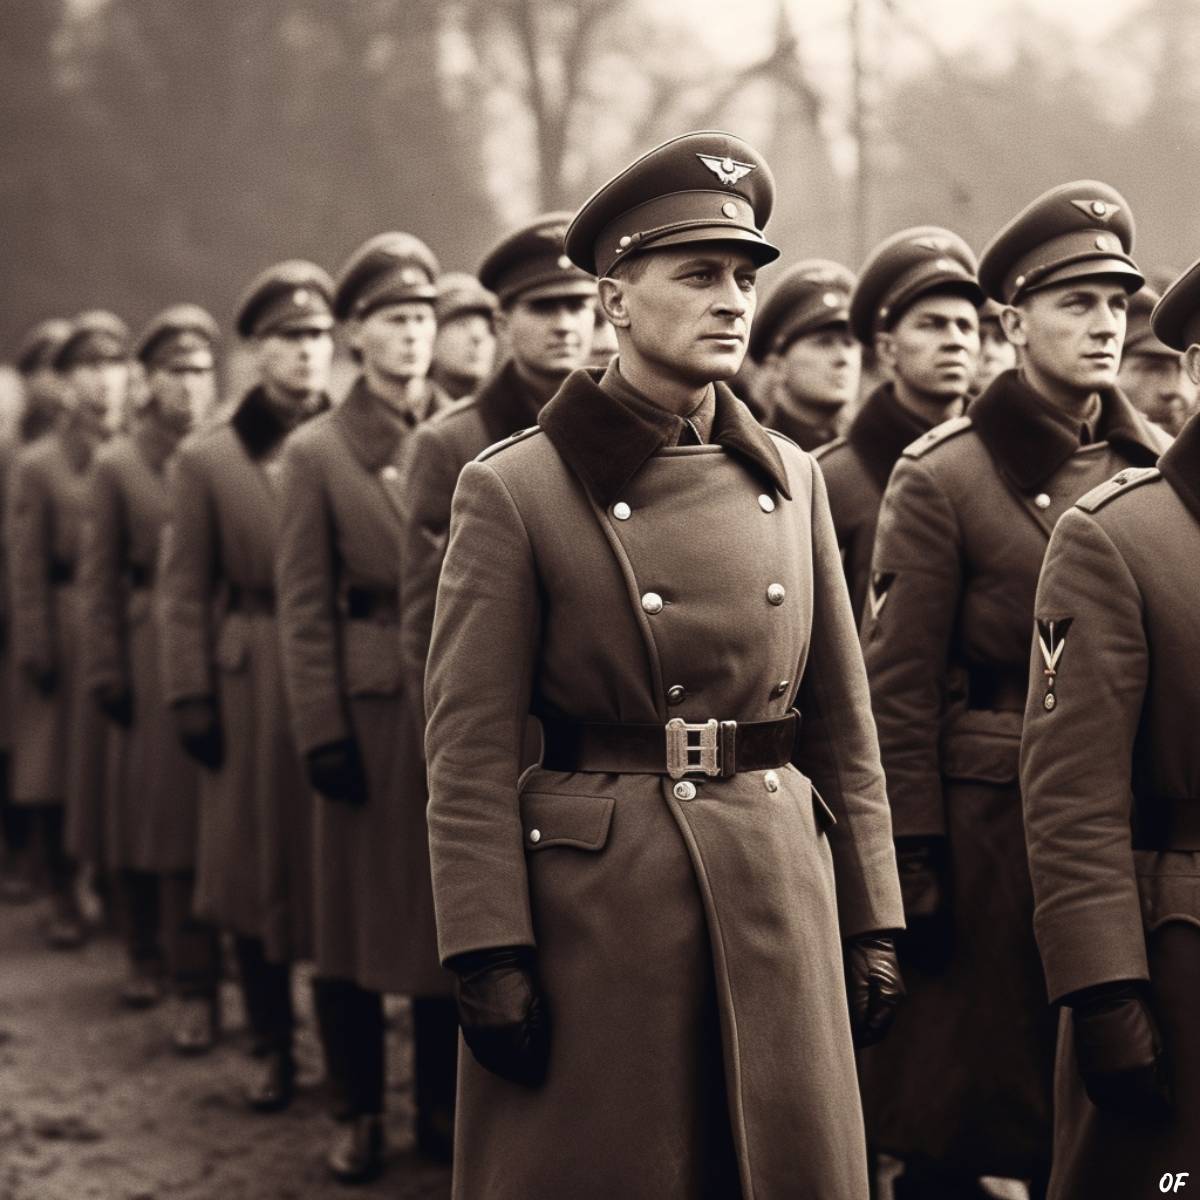 A group of German soldiers on parade during World War Two.